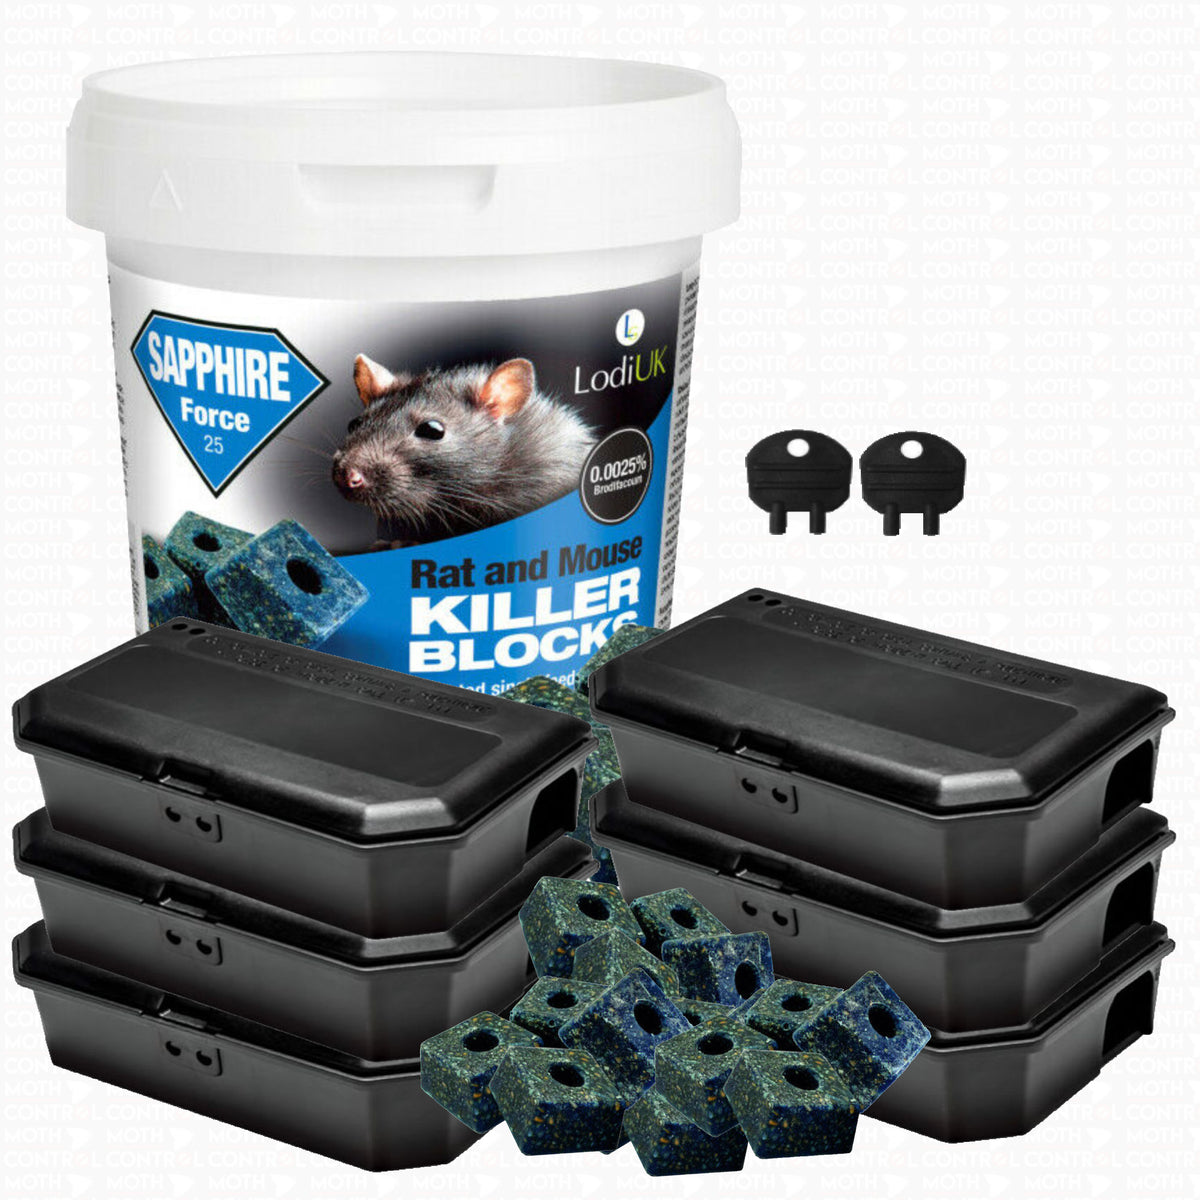 Pre-Baited Poison Mouse Bait Box Kit - Advanced Single Feed Mice Killer - Fast & Safe Infestation Control Ready-to-use Wax Block of Brodifacoum (6 Boxes & 300g Block) - Moth Control